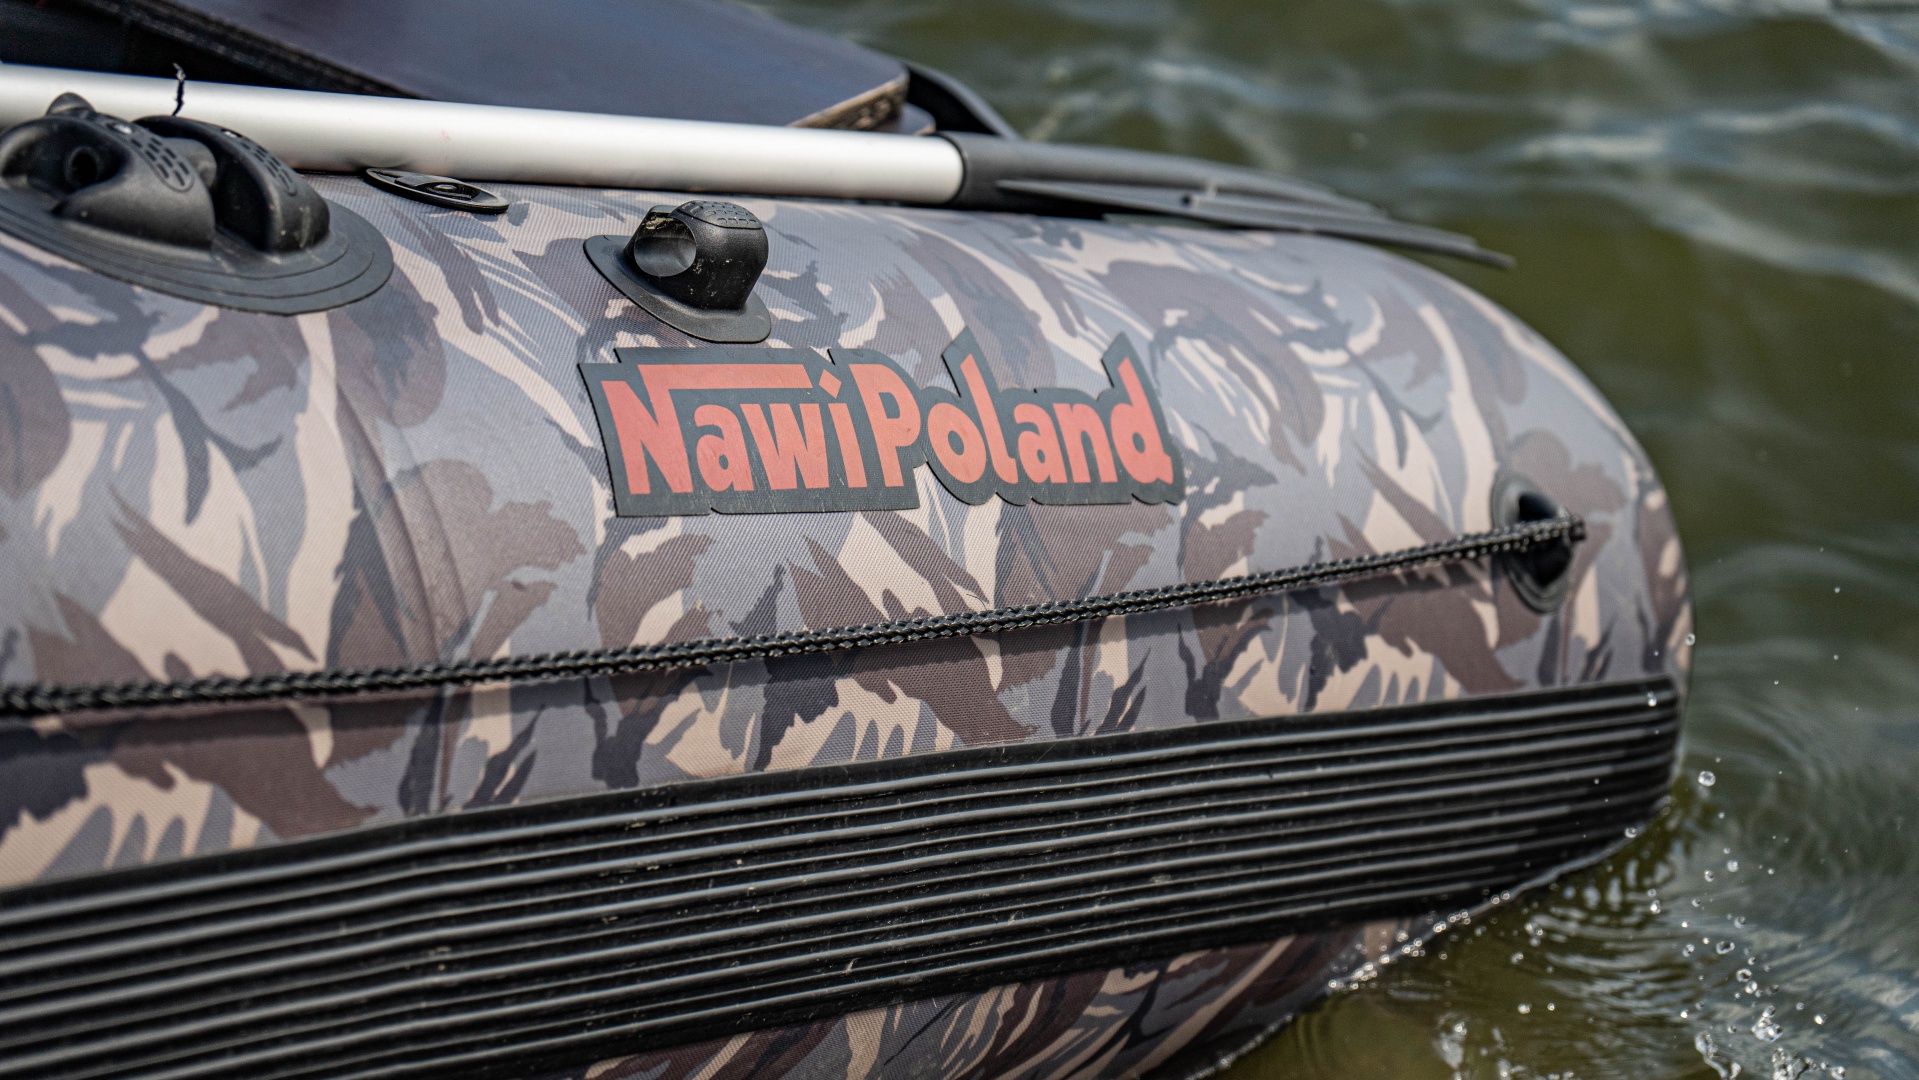 NawiPoland CAT 280 Inflatable Boat  - Катамаран